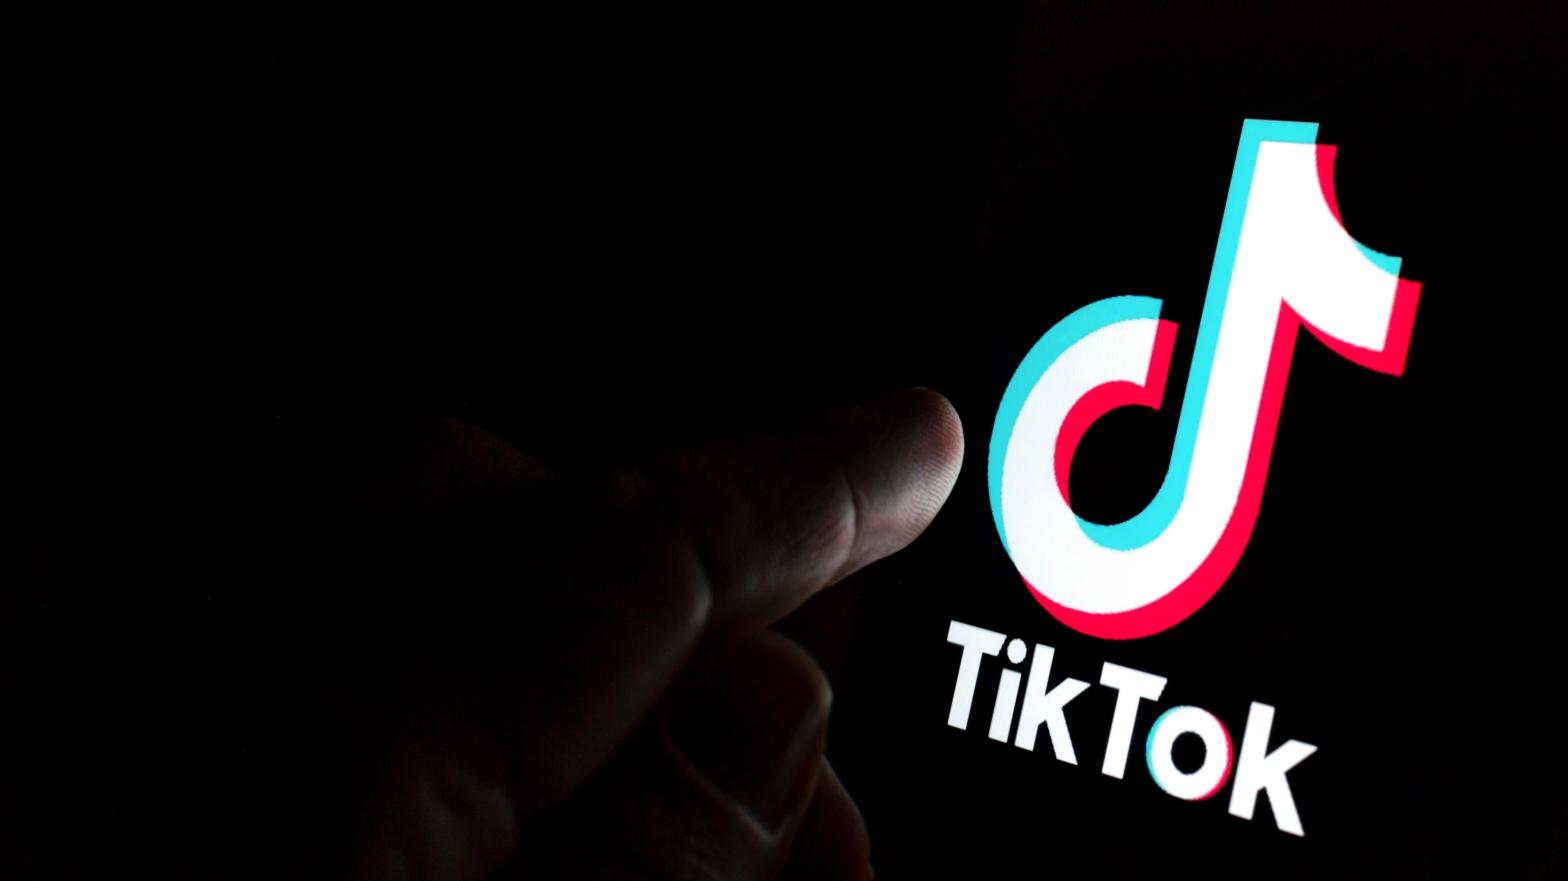 Earlier this year, TikTok began notifying select users when someone viewed their profile.  (Image: Ascannio, Shutterstock)